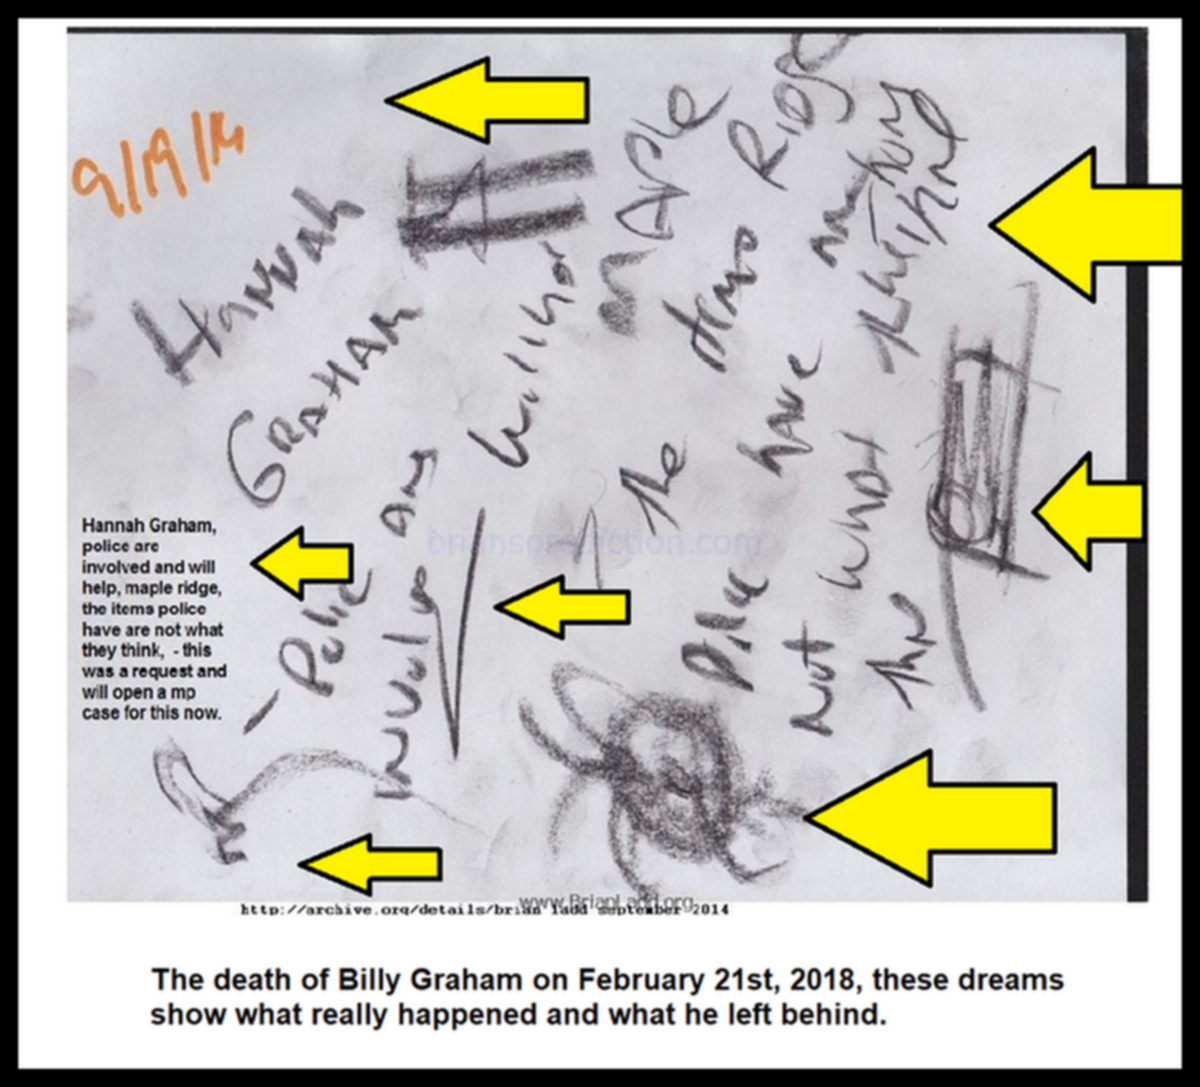 Hannah Graham The Death Of Billy Graham On February 21St 2018 These Dreams Show What Really Happened And What He Left Be...
The Death of Billy Graham on February 21st, 2018, These Dreams Show What Really Happened and What He Left Behind. Murder for Sure and He Did Leave Something for the World to See....
